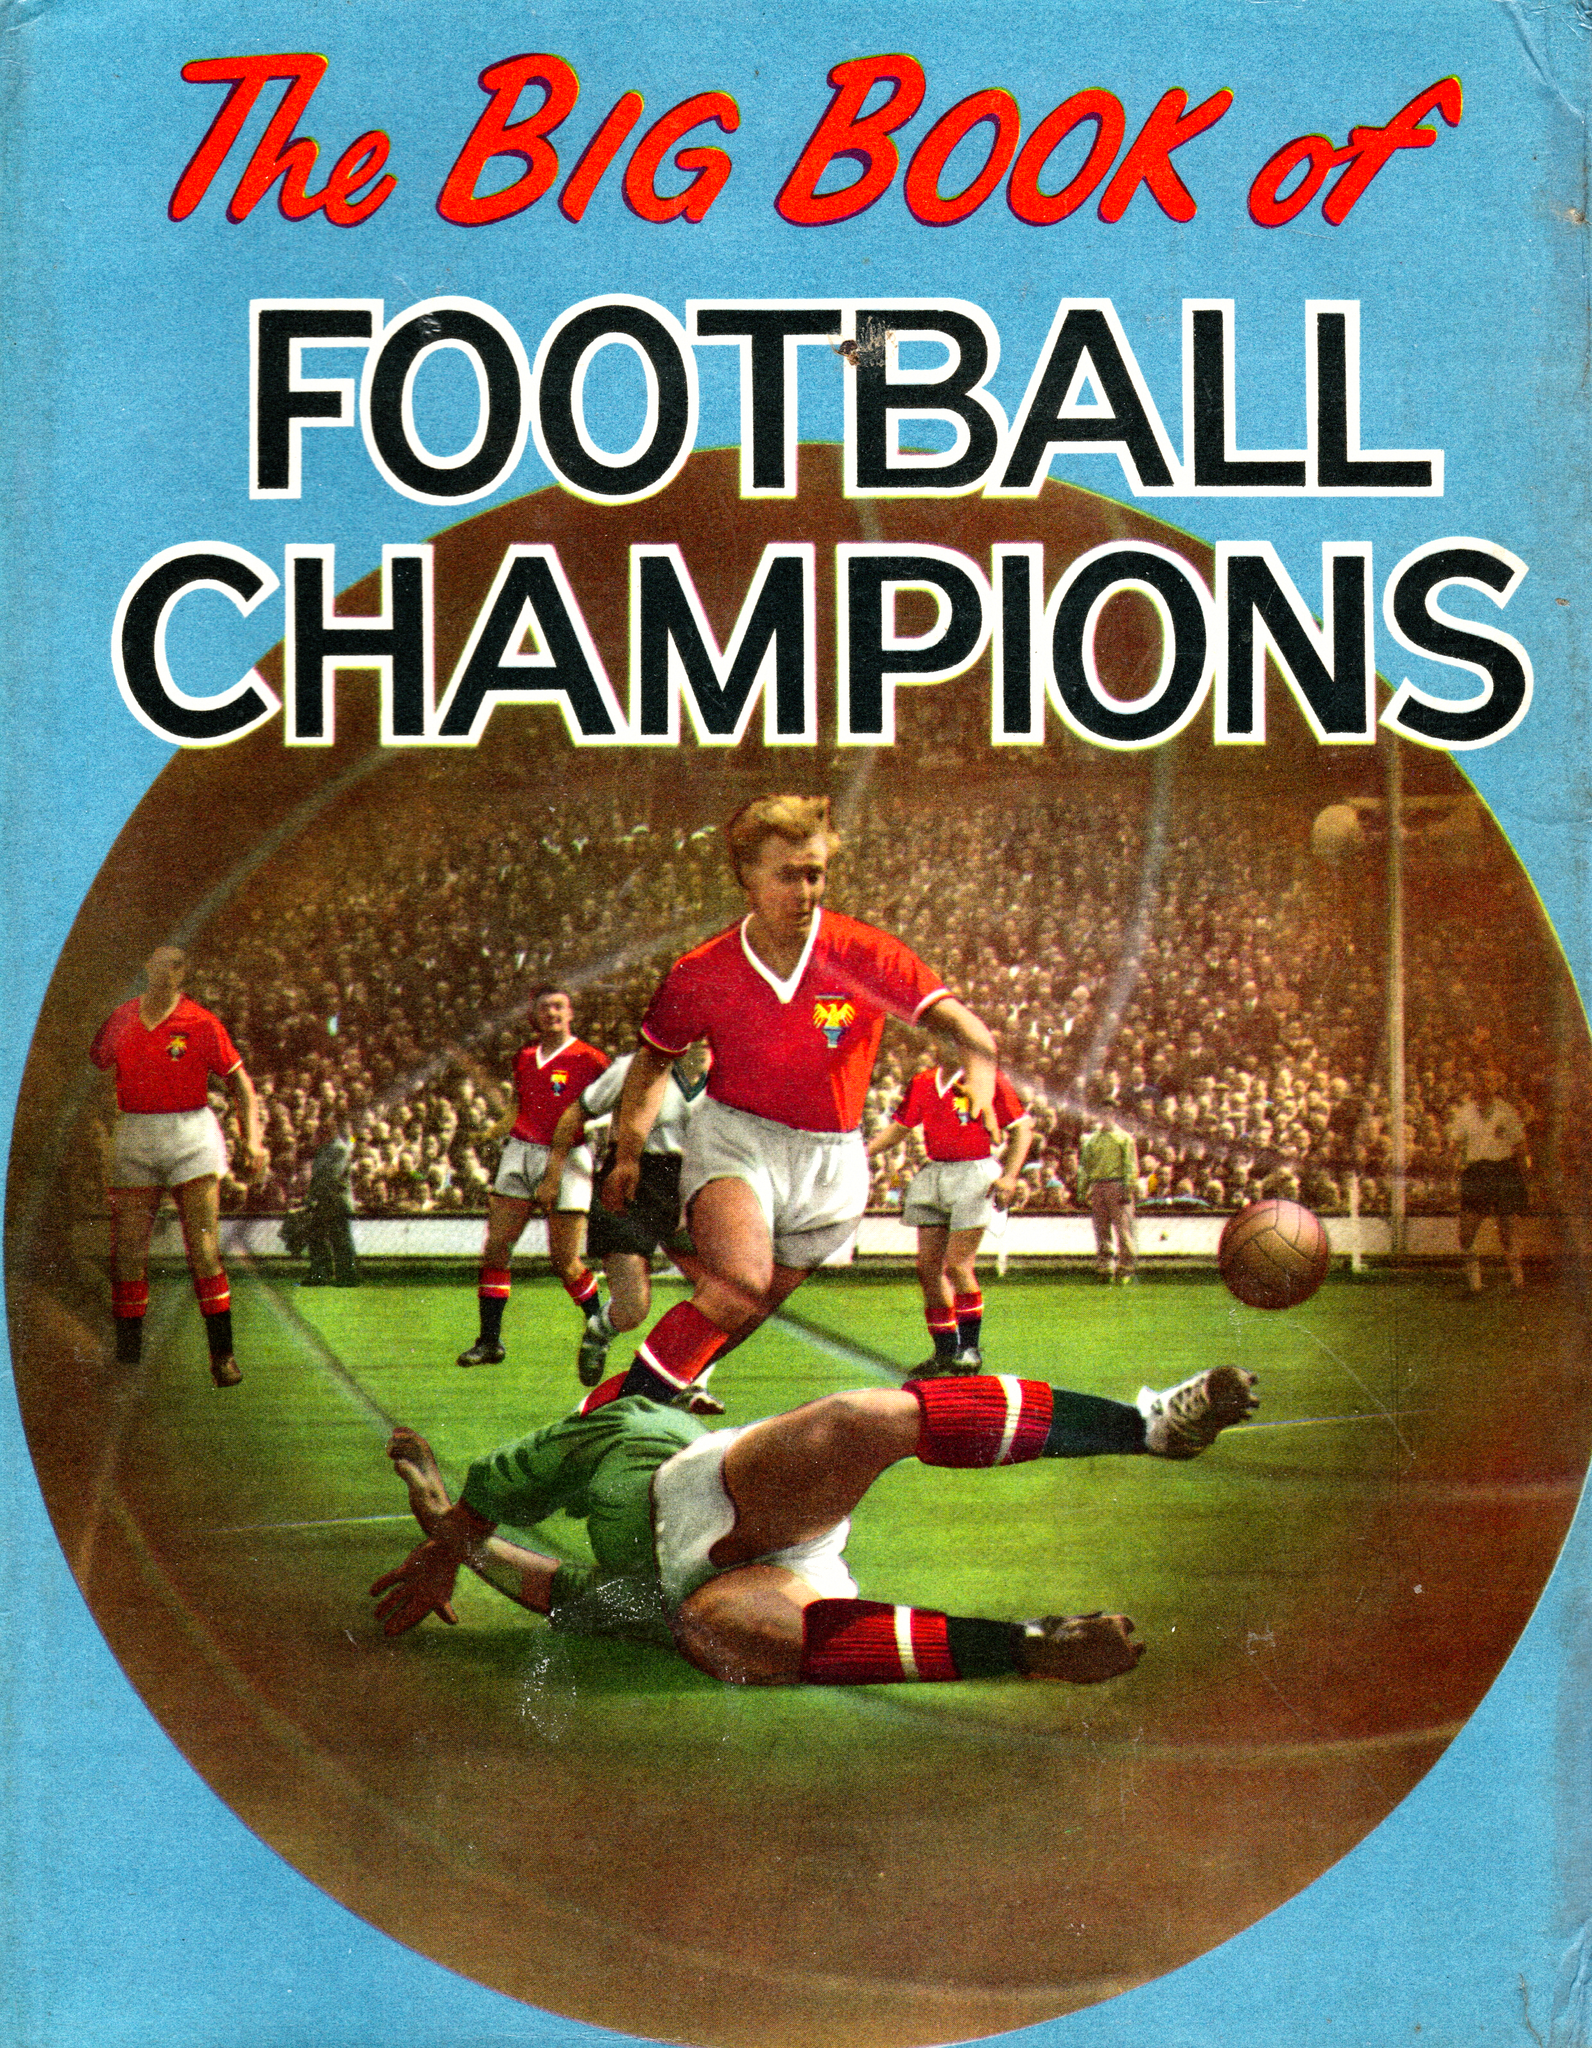 The Big Book of Football Champions 1958